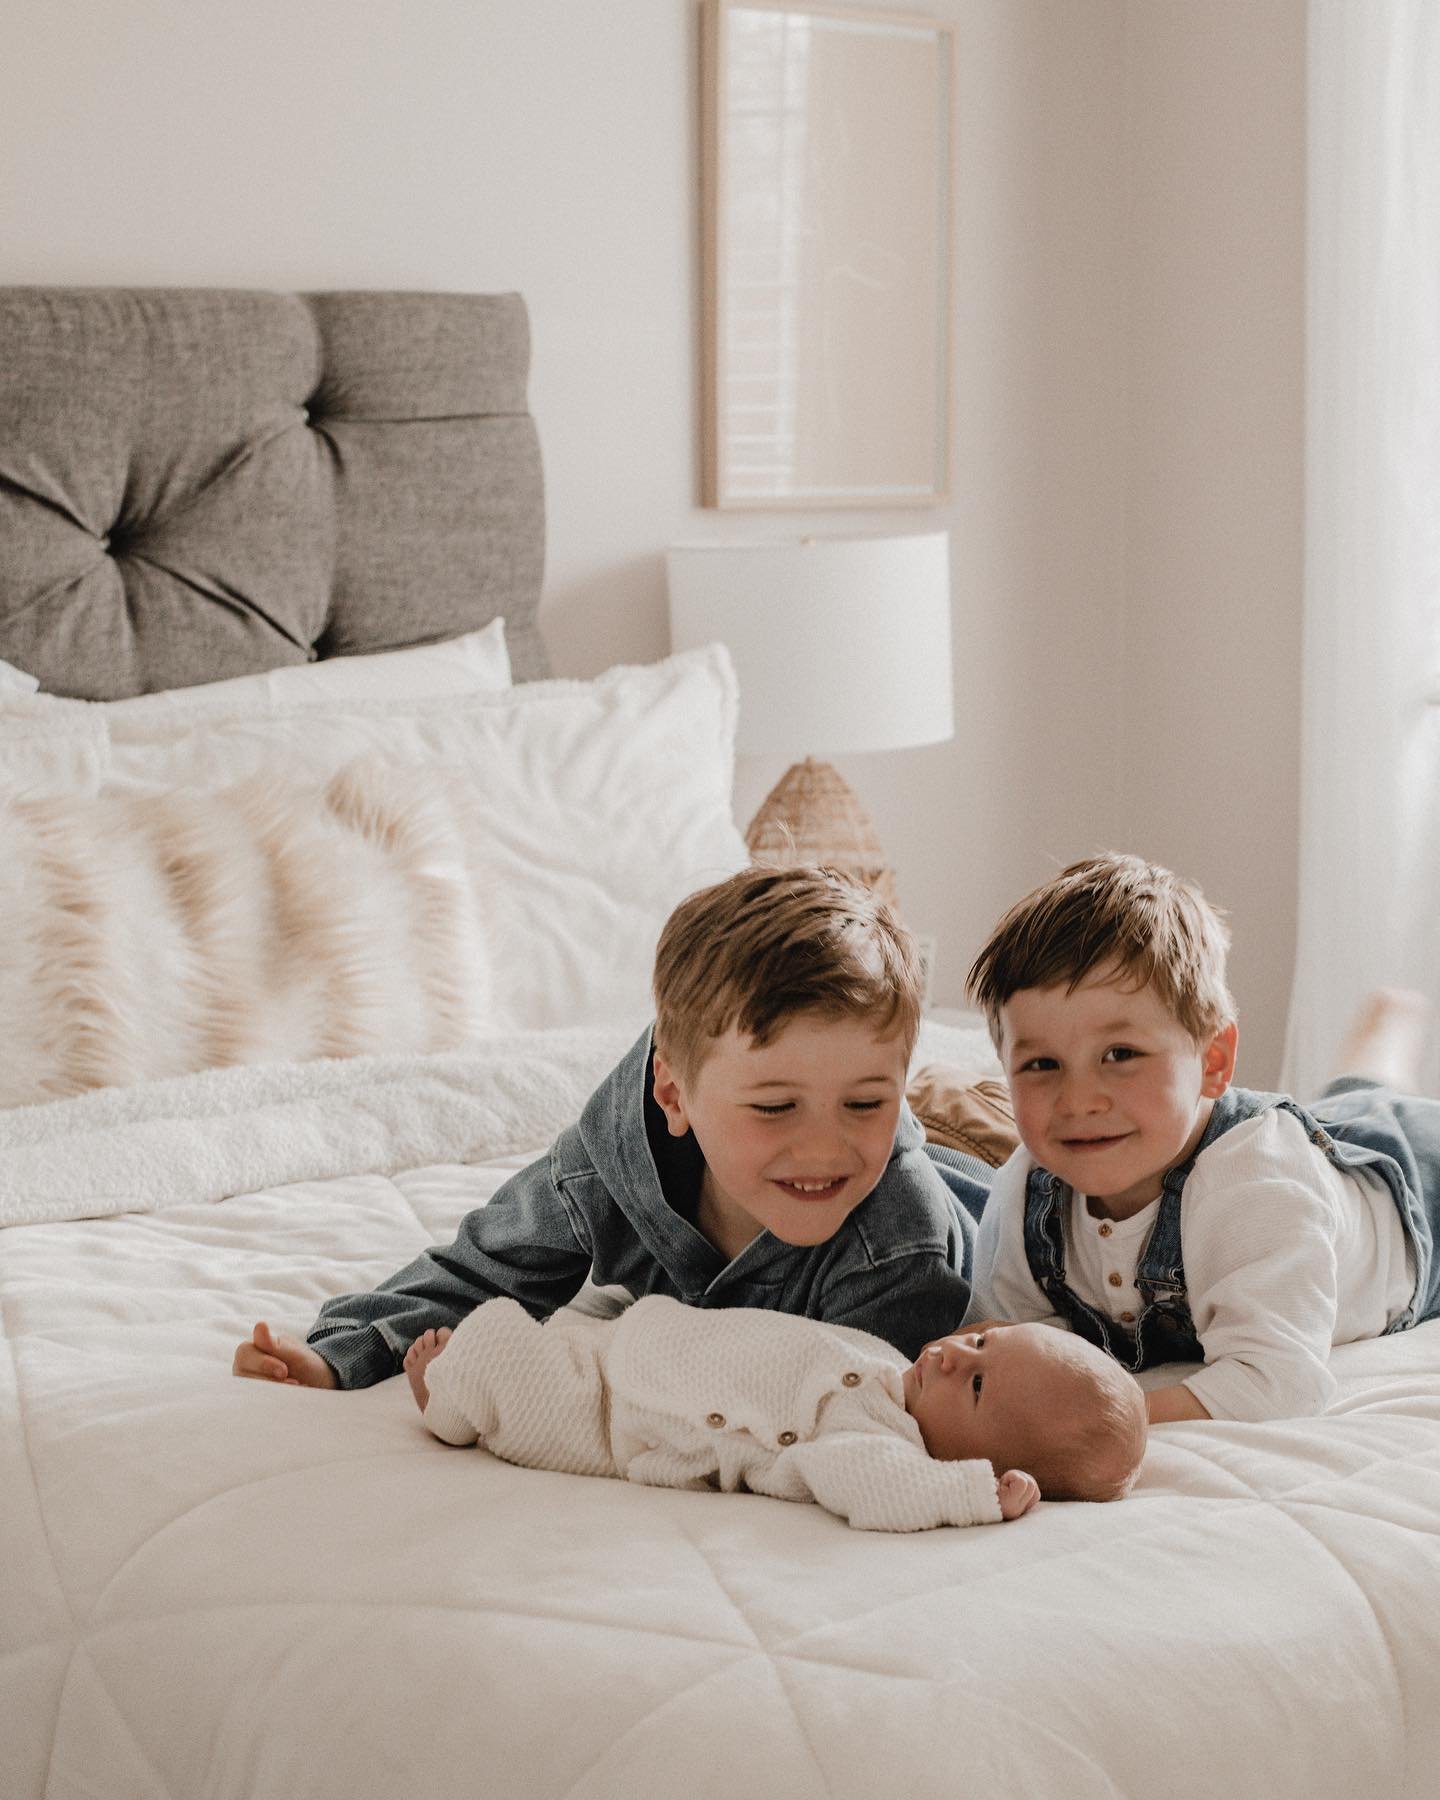 Including the whole family in this newborn session was so special. These two boys are big fans of their new little brother 💛

&bull;
&bull;
&bull;

Newborn, newborn photography, lifestyle newborn photography, lifestyle photography, family photograph